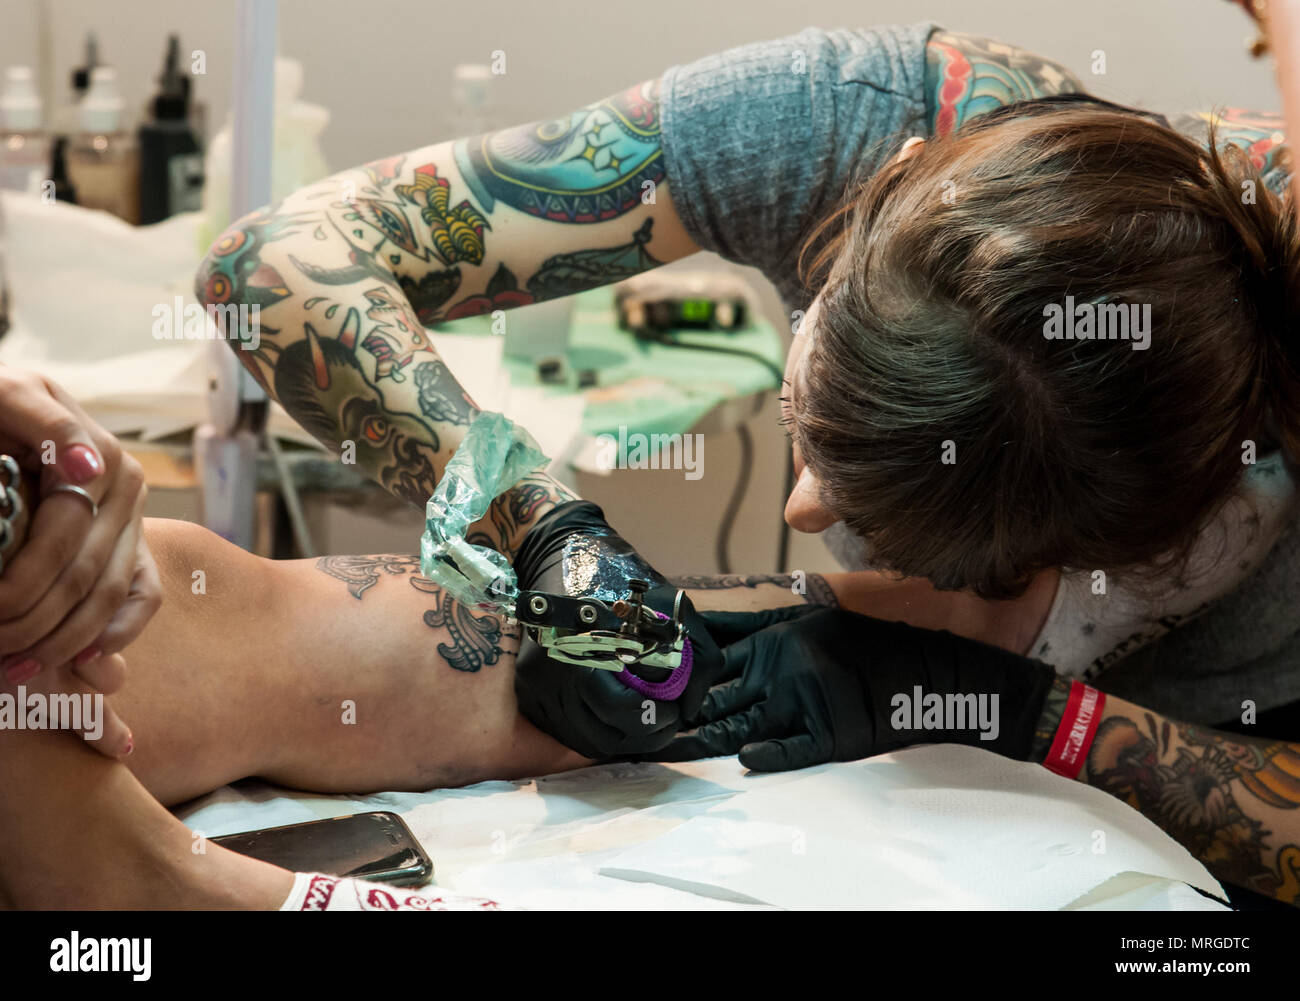 Three Indians Are Now Among The Top 100 Tattoo Artists In The World!